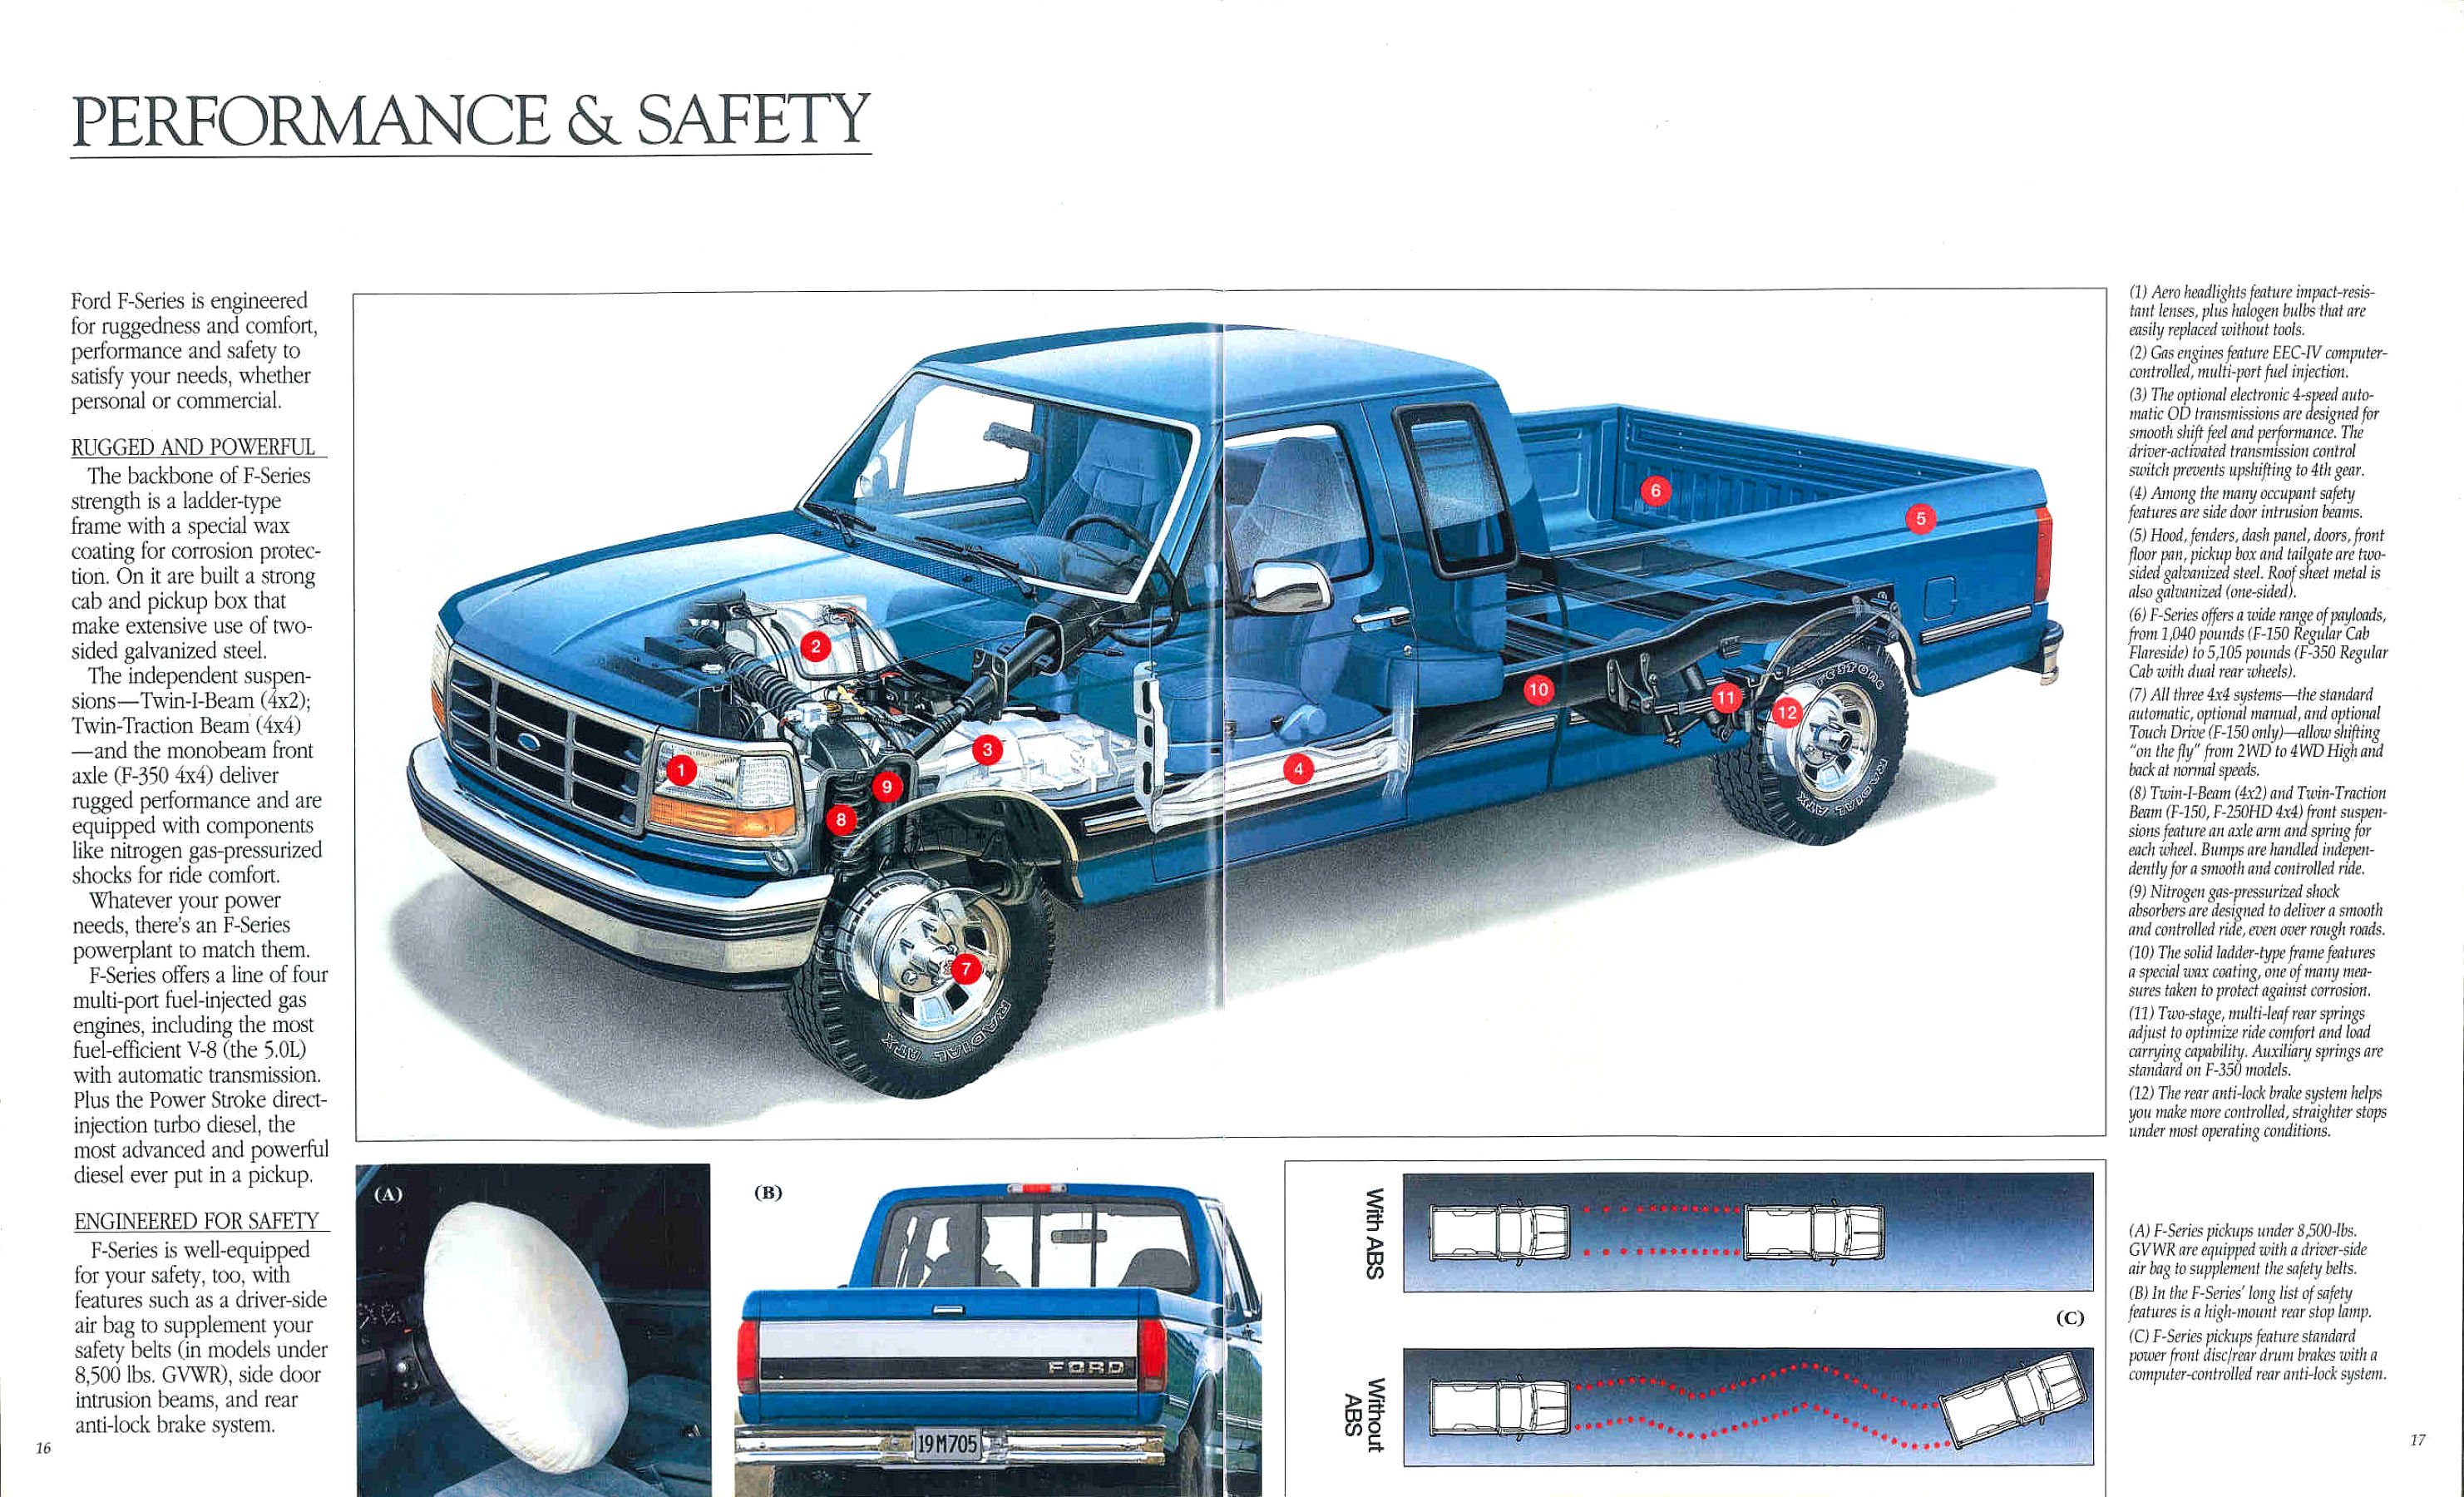 1995 Ford F-Series-16-17